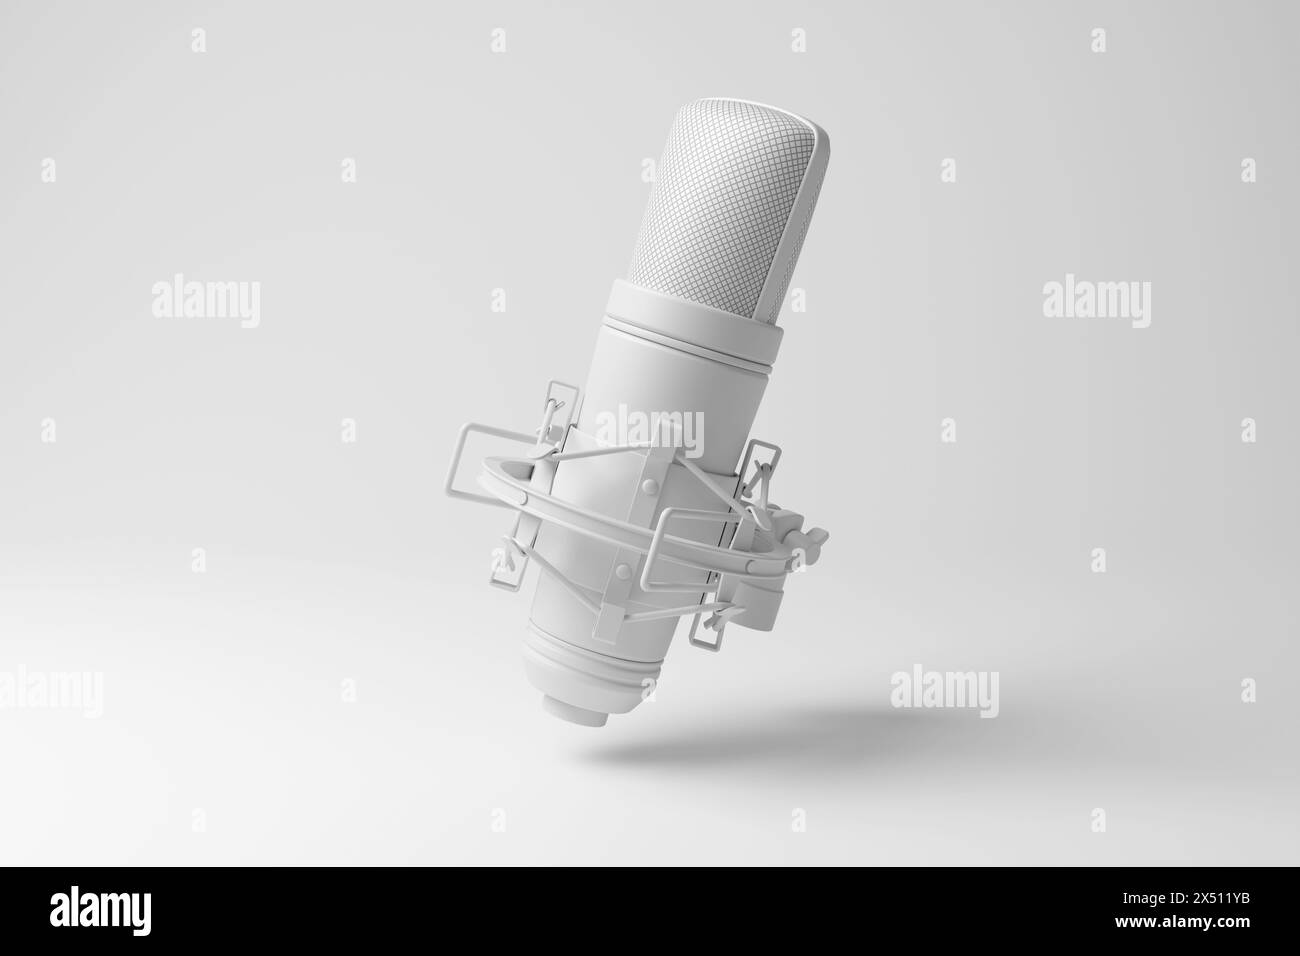 White studio condenser microphone floating in mid air in monochrome and minimalism. Concept of recording studios for music production and vocals Stock Photo